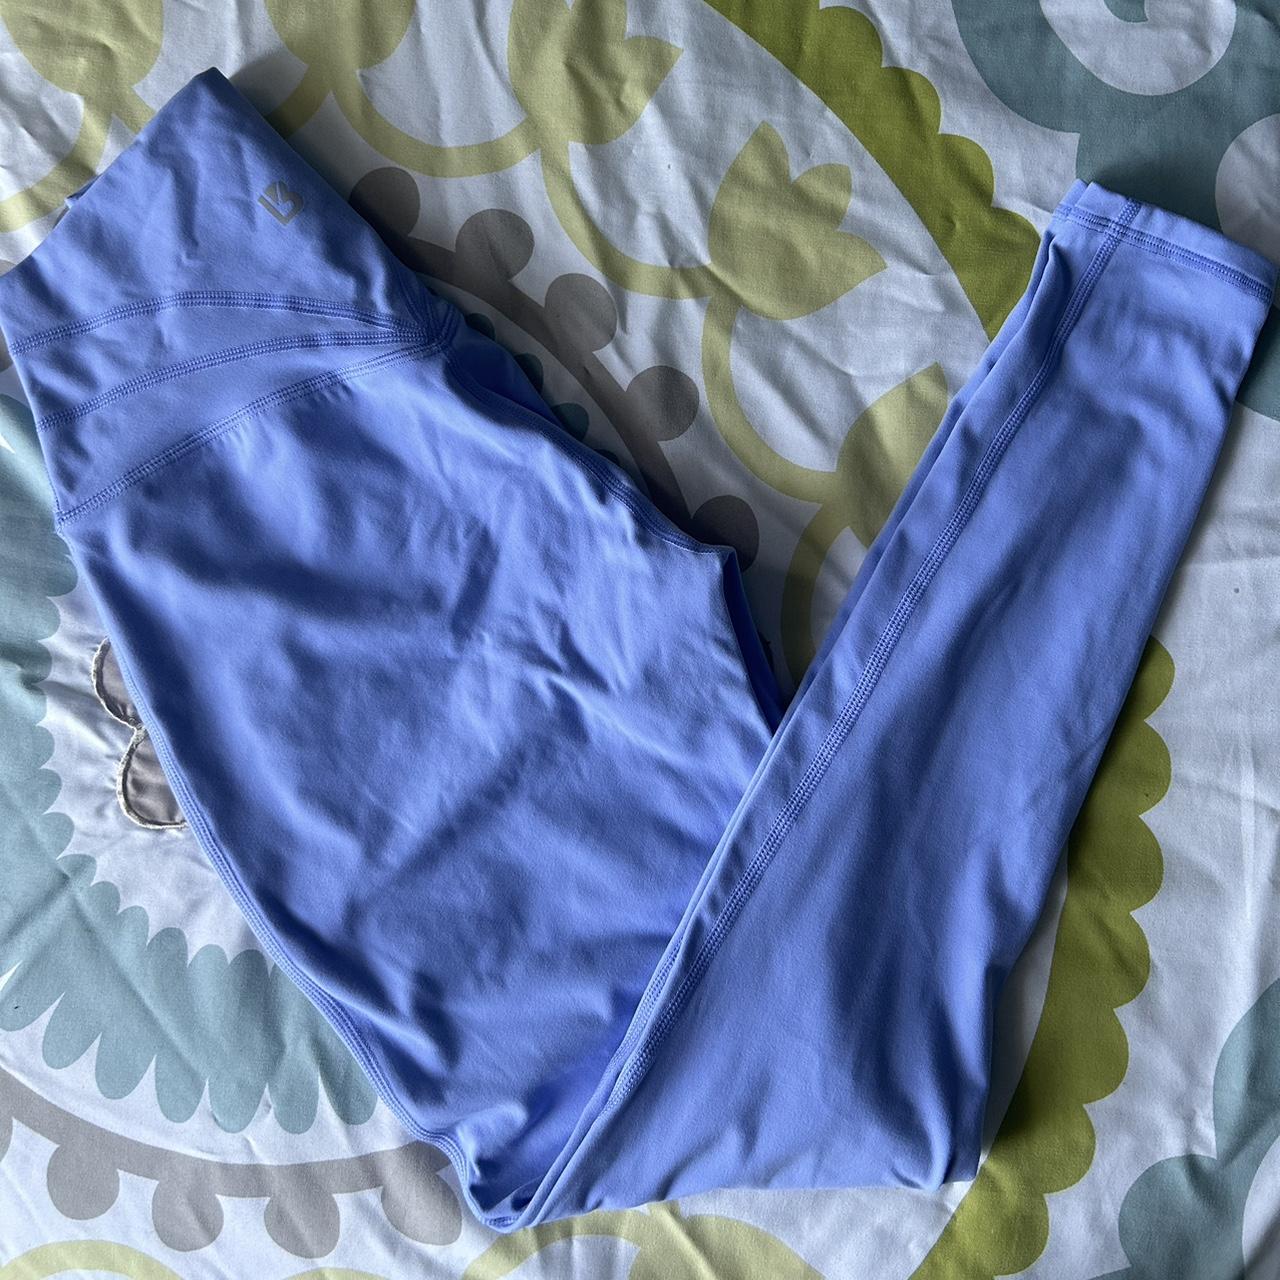 Buffbunny Blue Live Leggings in Nubre These are the - Depop